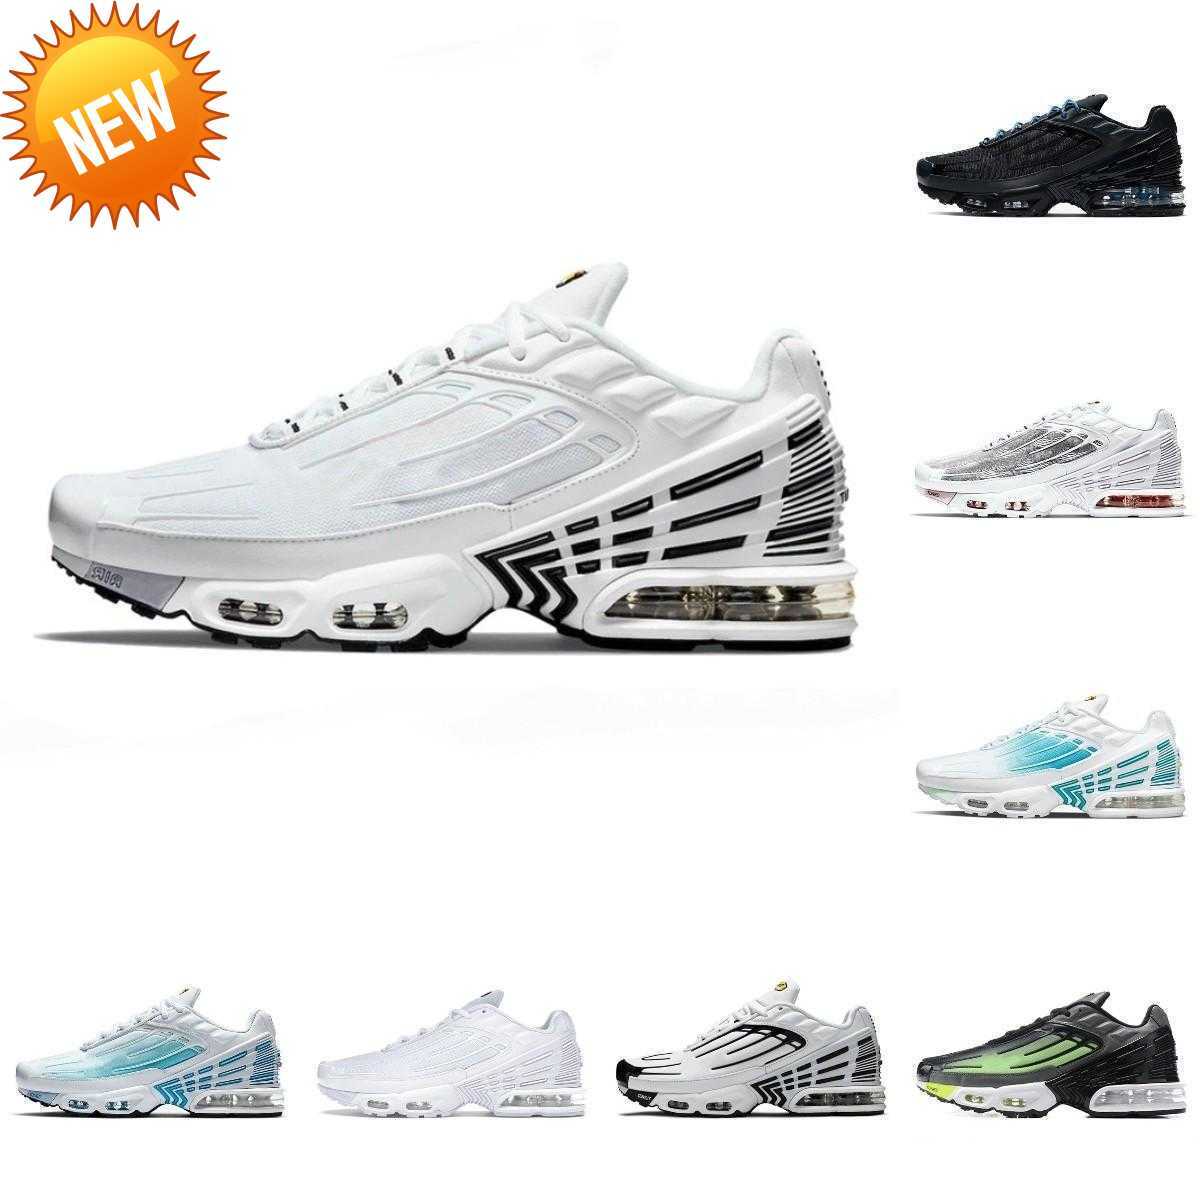 

NEW Sandals Top Quality Tn Plus 3 Tuned III Men Sports Shoes Laser Blue White Leather Aquamarine Obsidian Hyper Violet Deep Parachute Ghost Green Triple, Plus30019